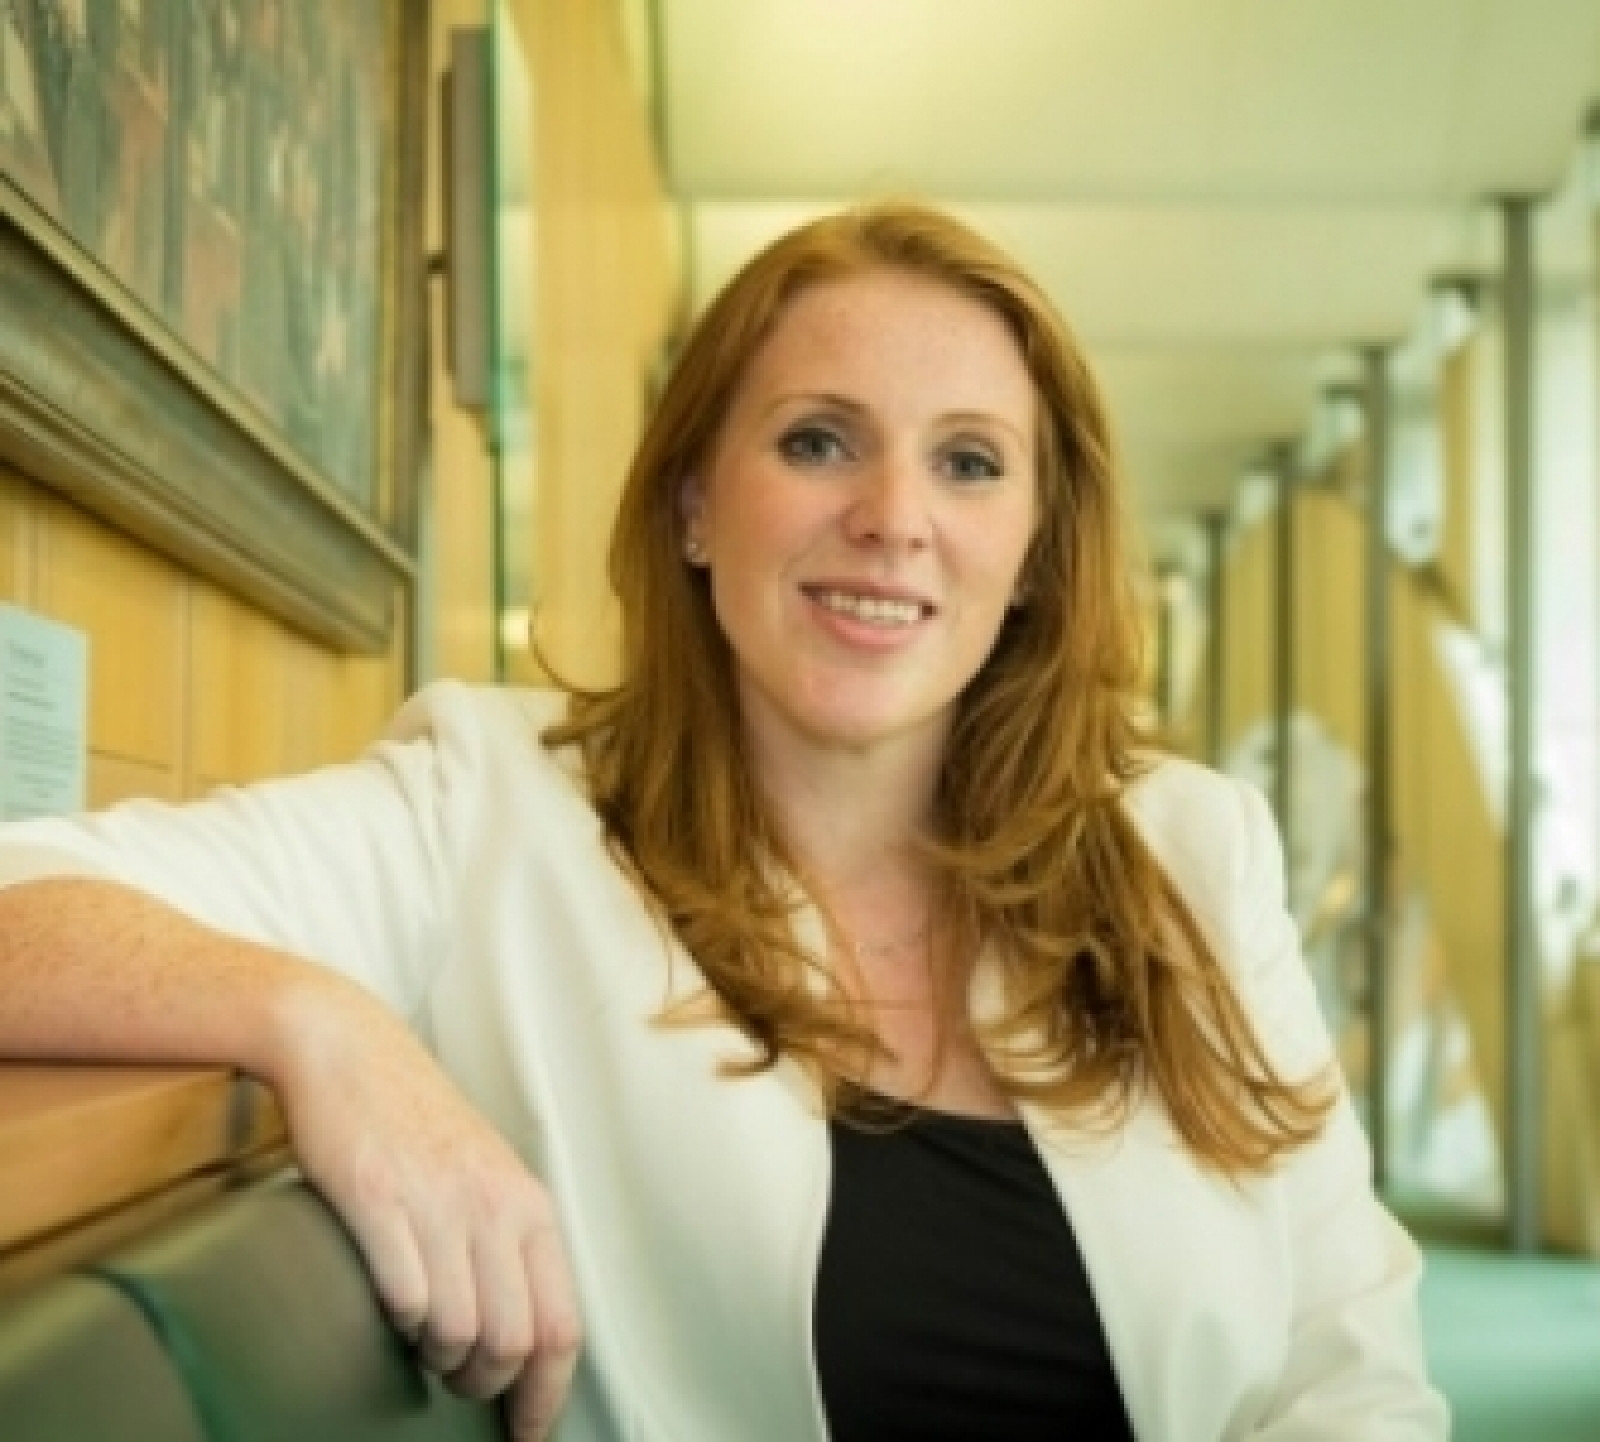 APMG Invitation to Skills Commission Reception with keynote from Angela Rayner MP